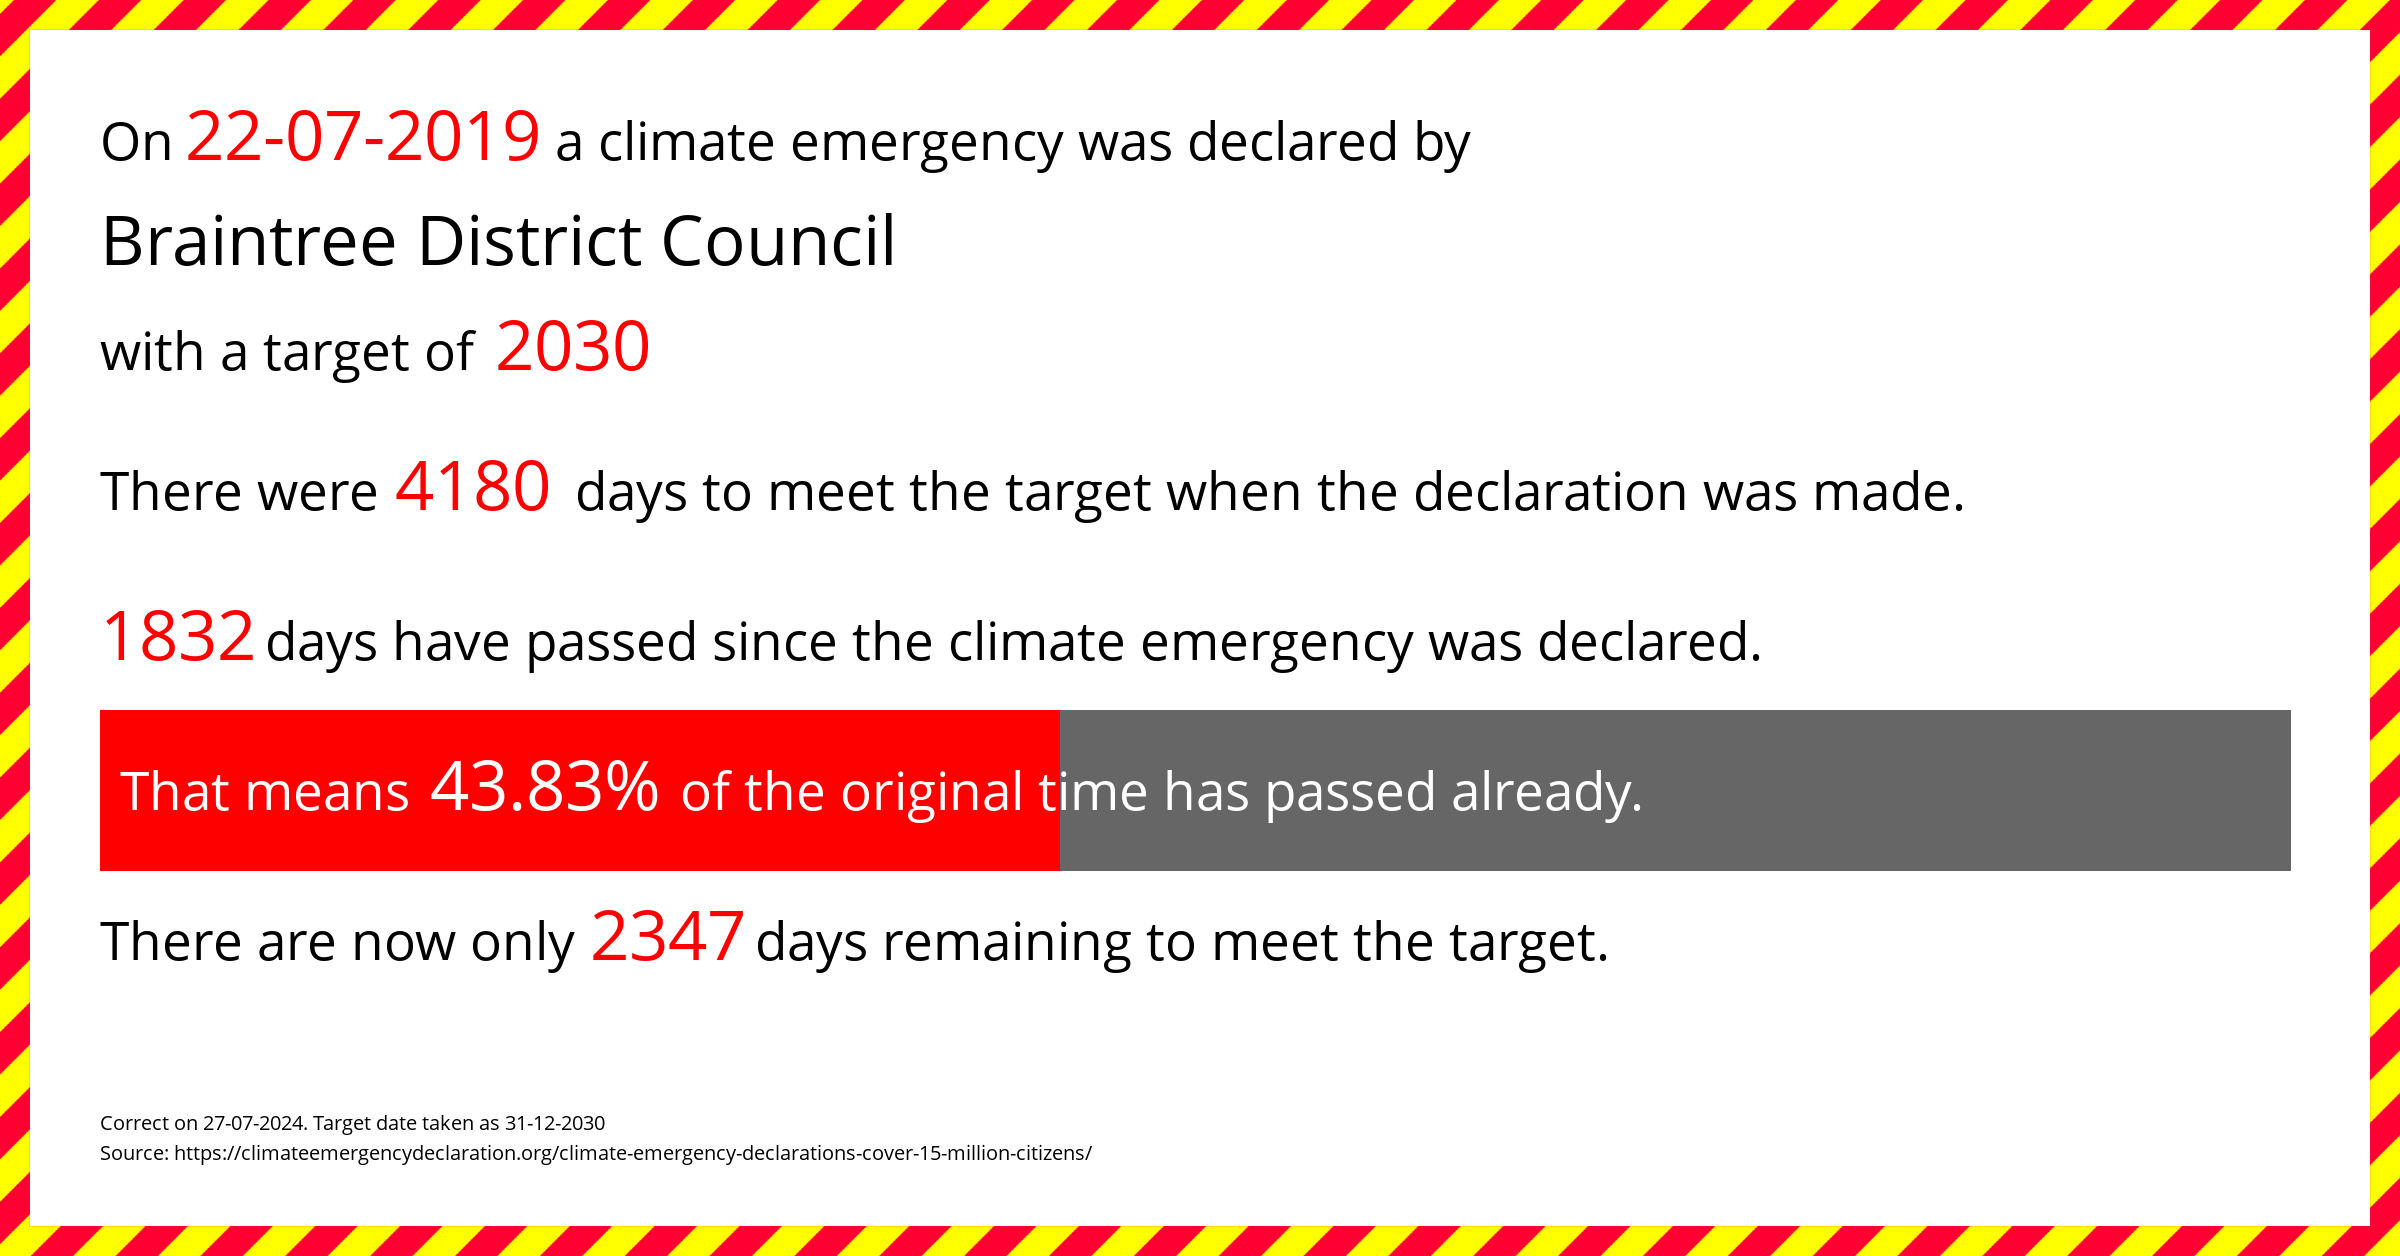 Braintree District Council declared a Climate emergency on Monday 22nd July 2019, with a target of 2030.